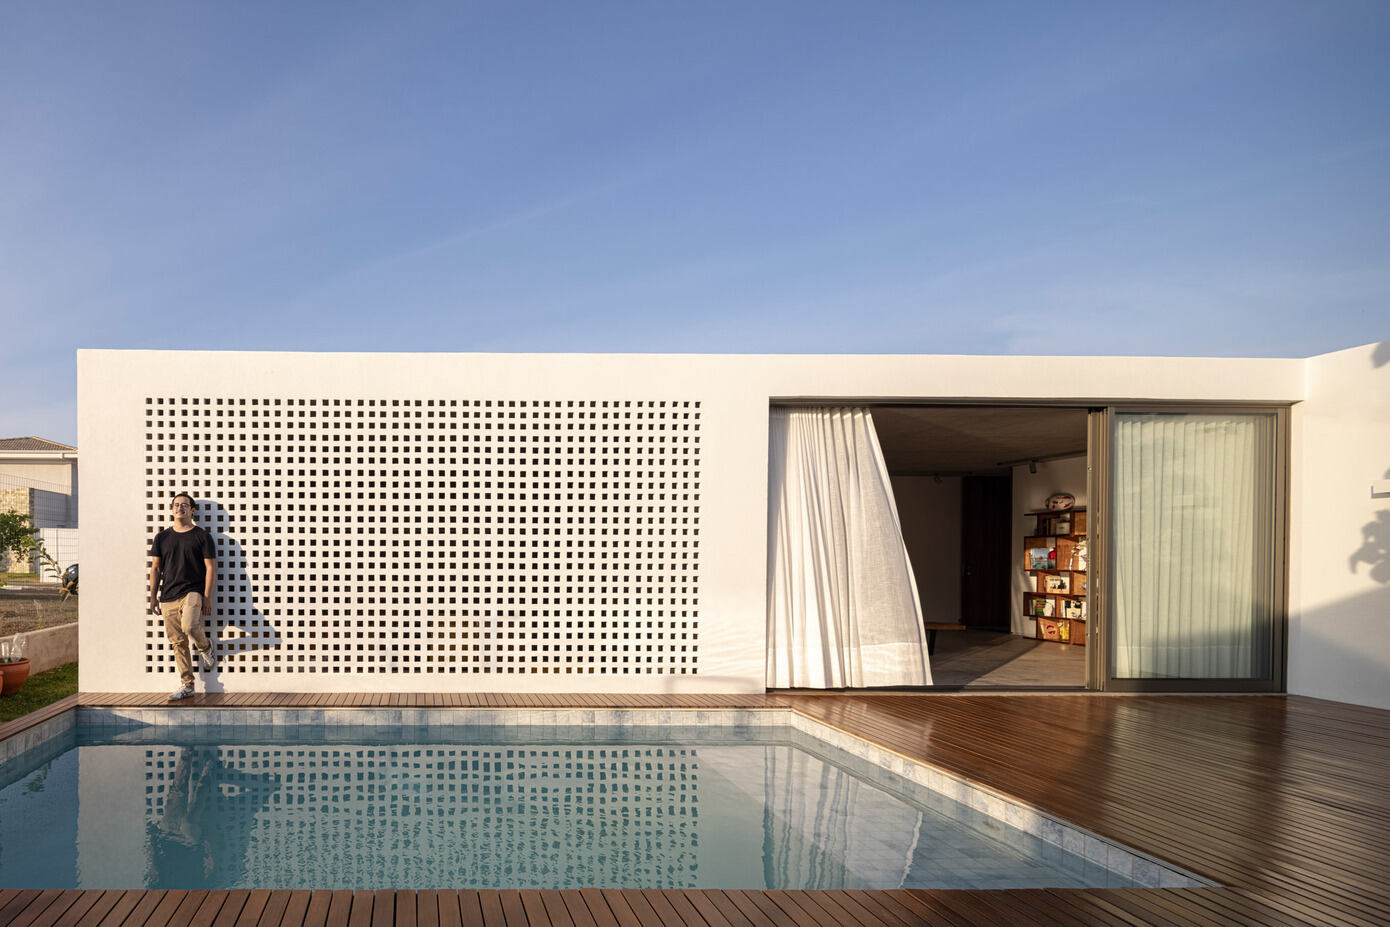 Couri House: A Single-Story Home in the Heart of Brasília